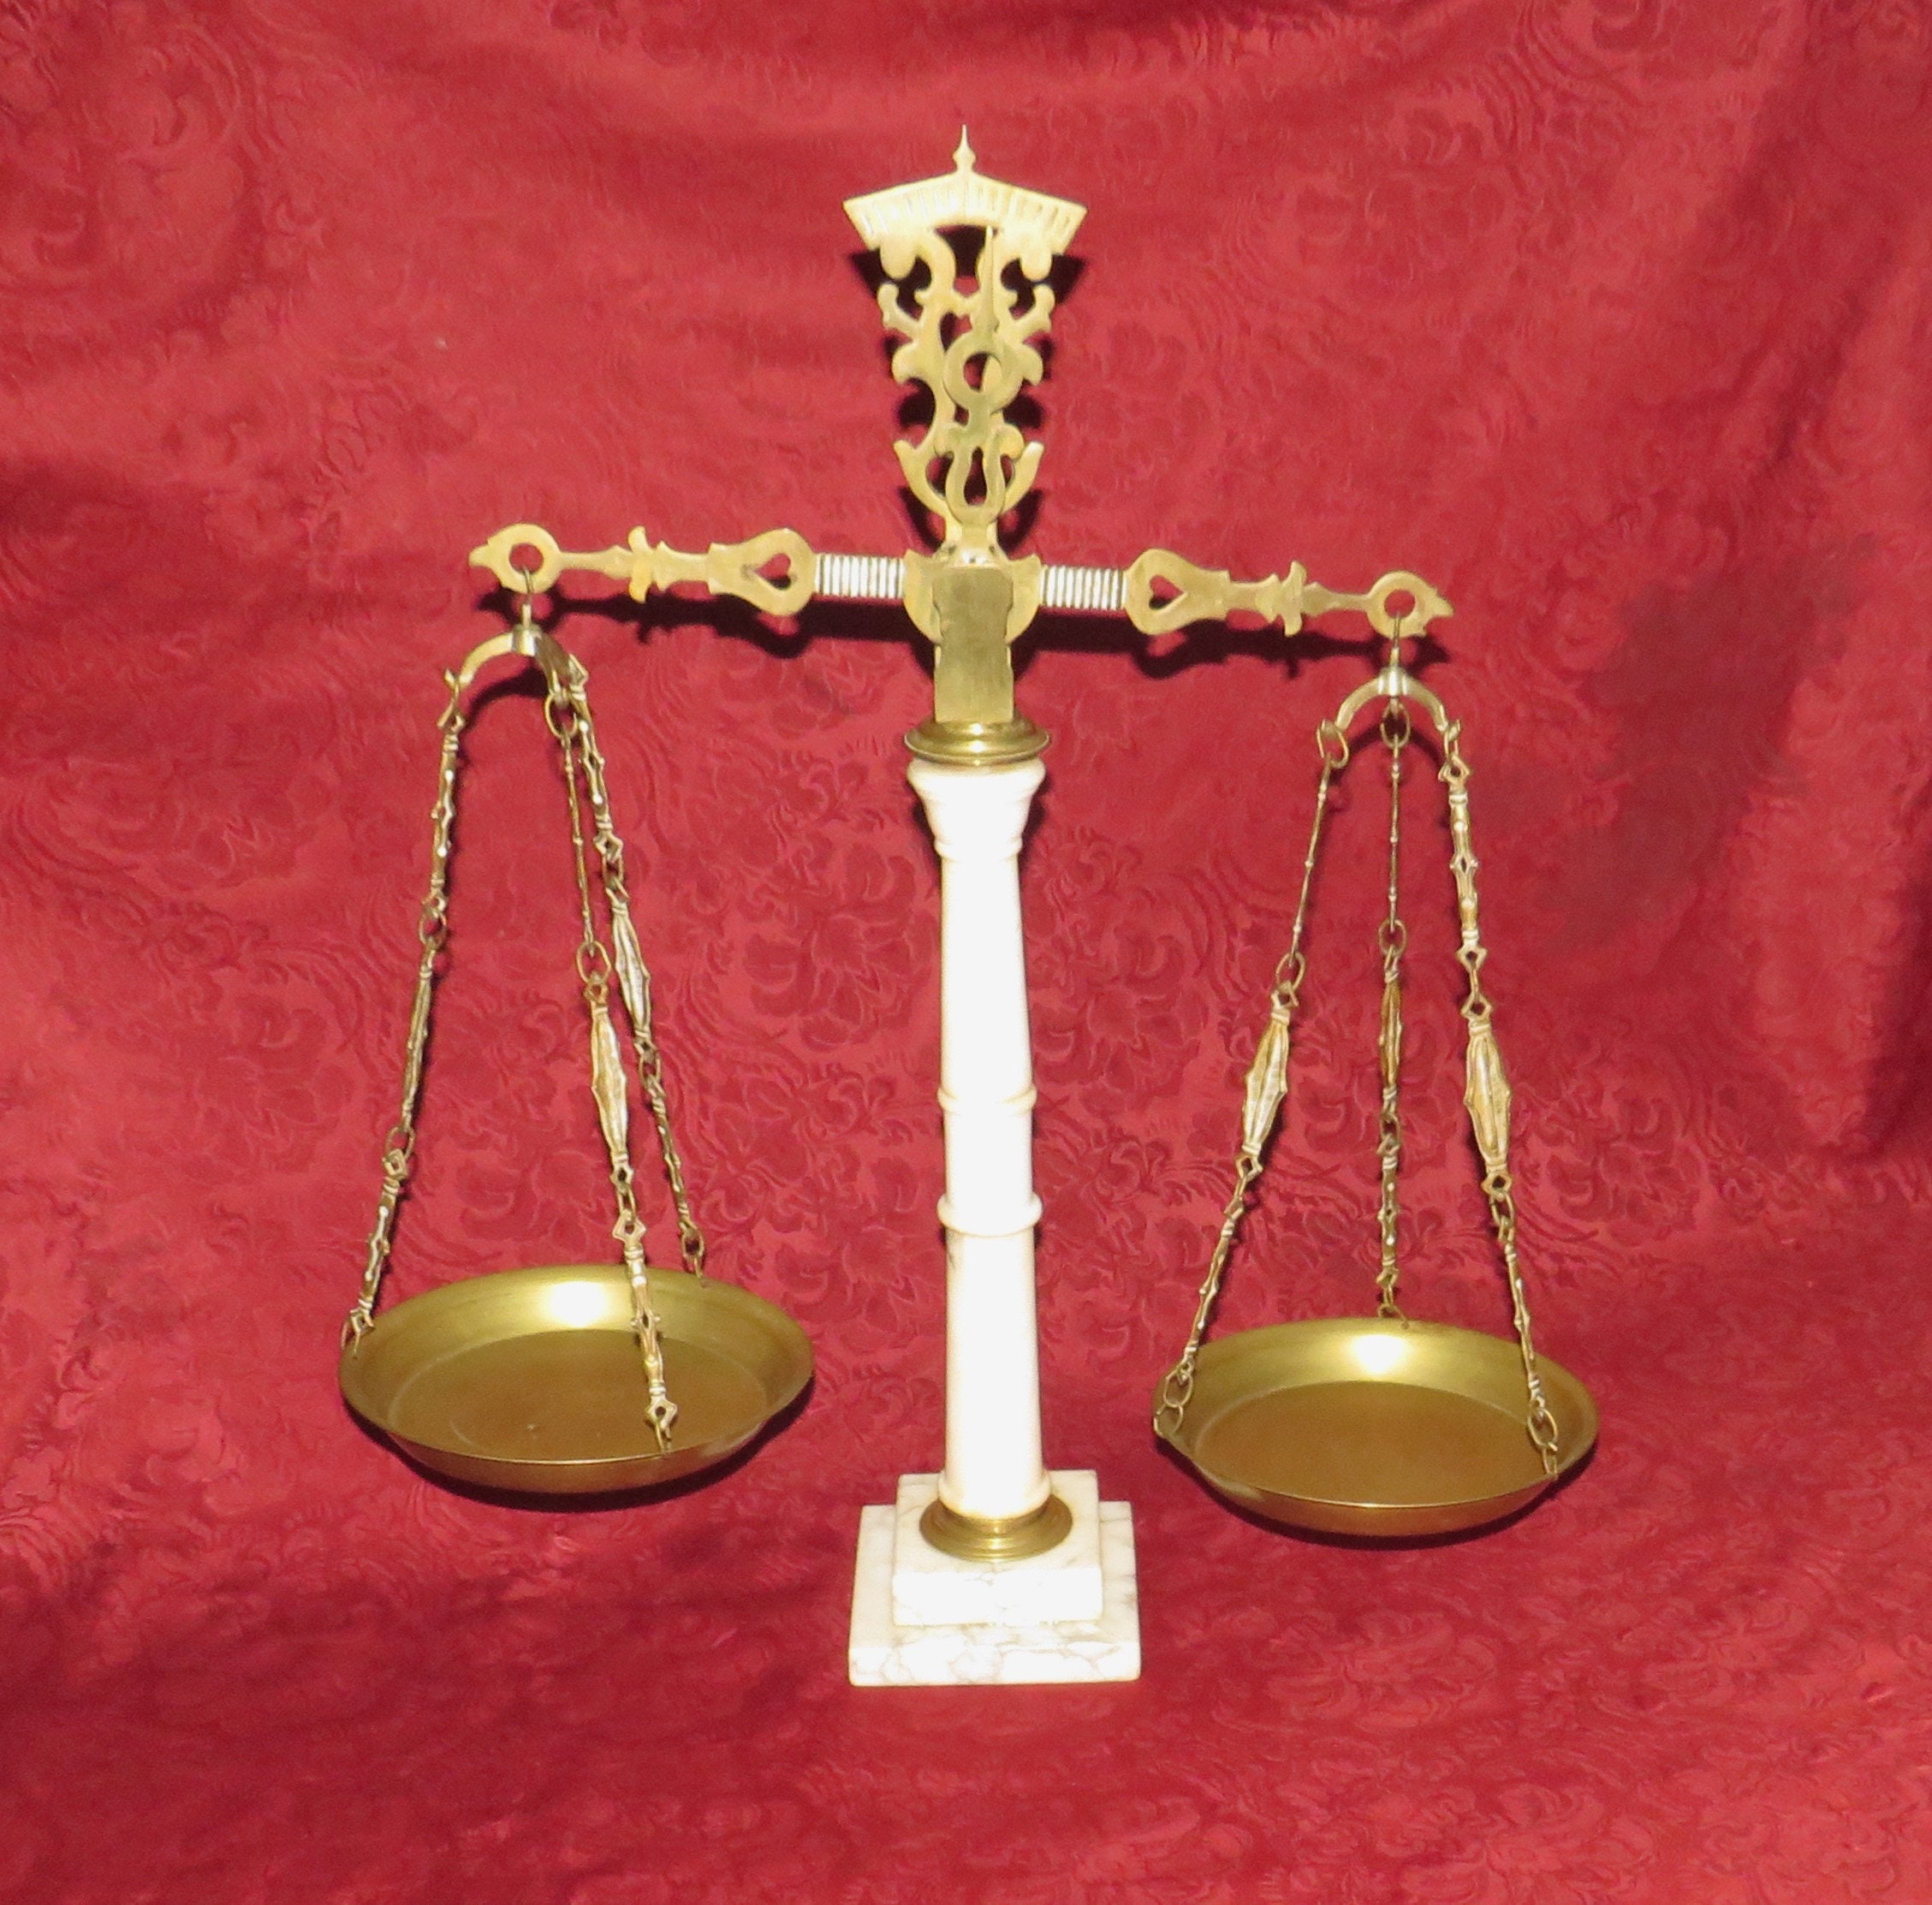 Vintage Style Metal Balance Scale, Decorative Antique Weight Balancing  Scale, Lawyer Scale of Justice, Jewelry Tower Tray, Farmhouse Candleholder